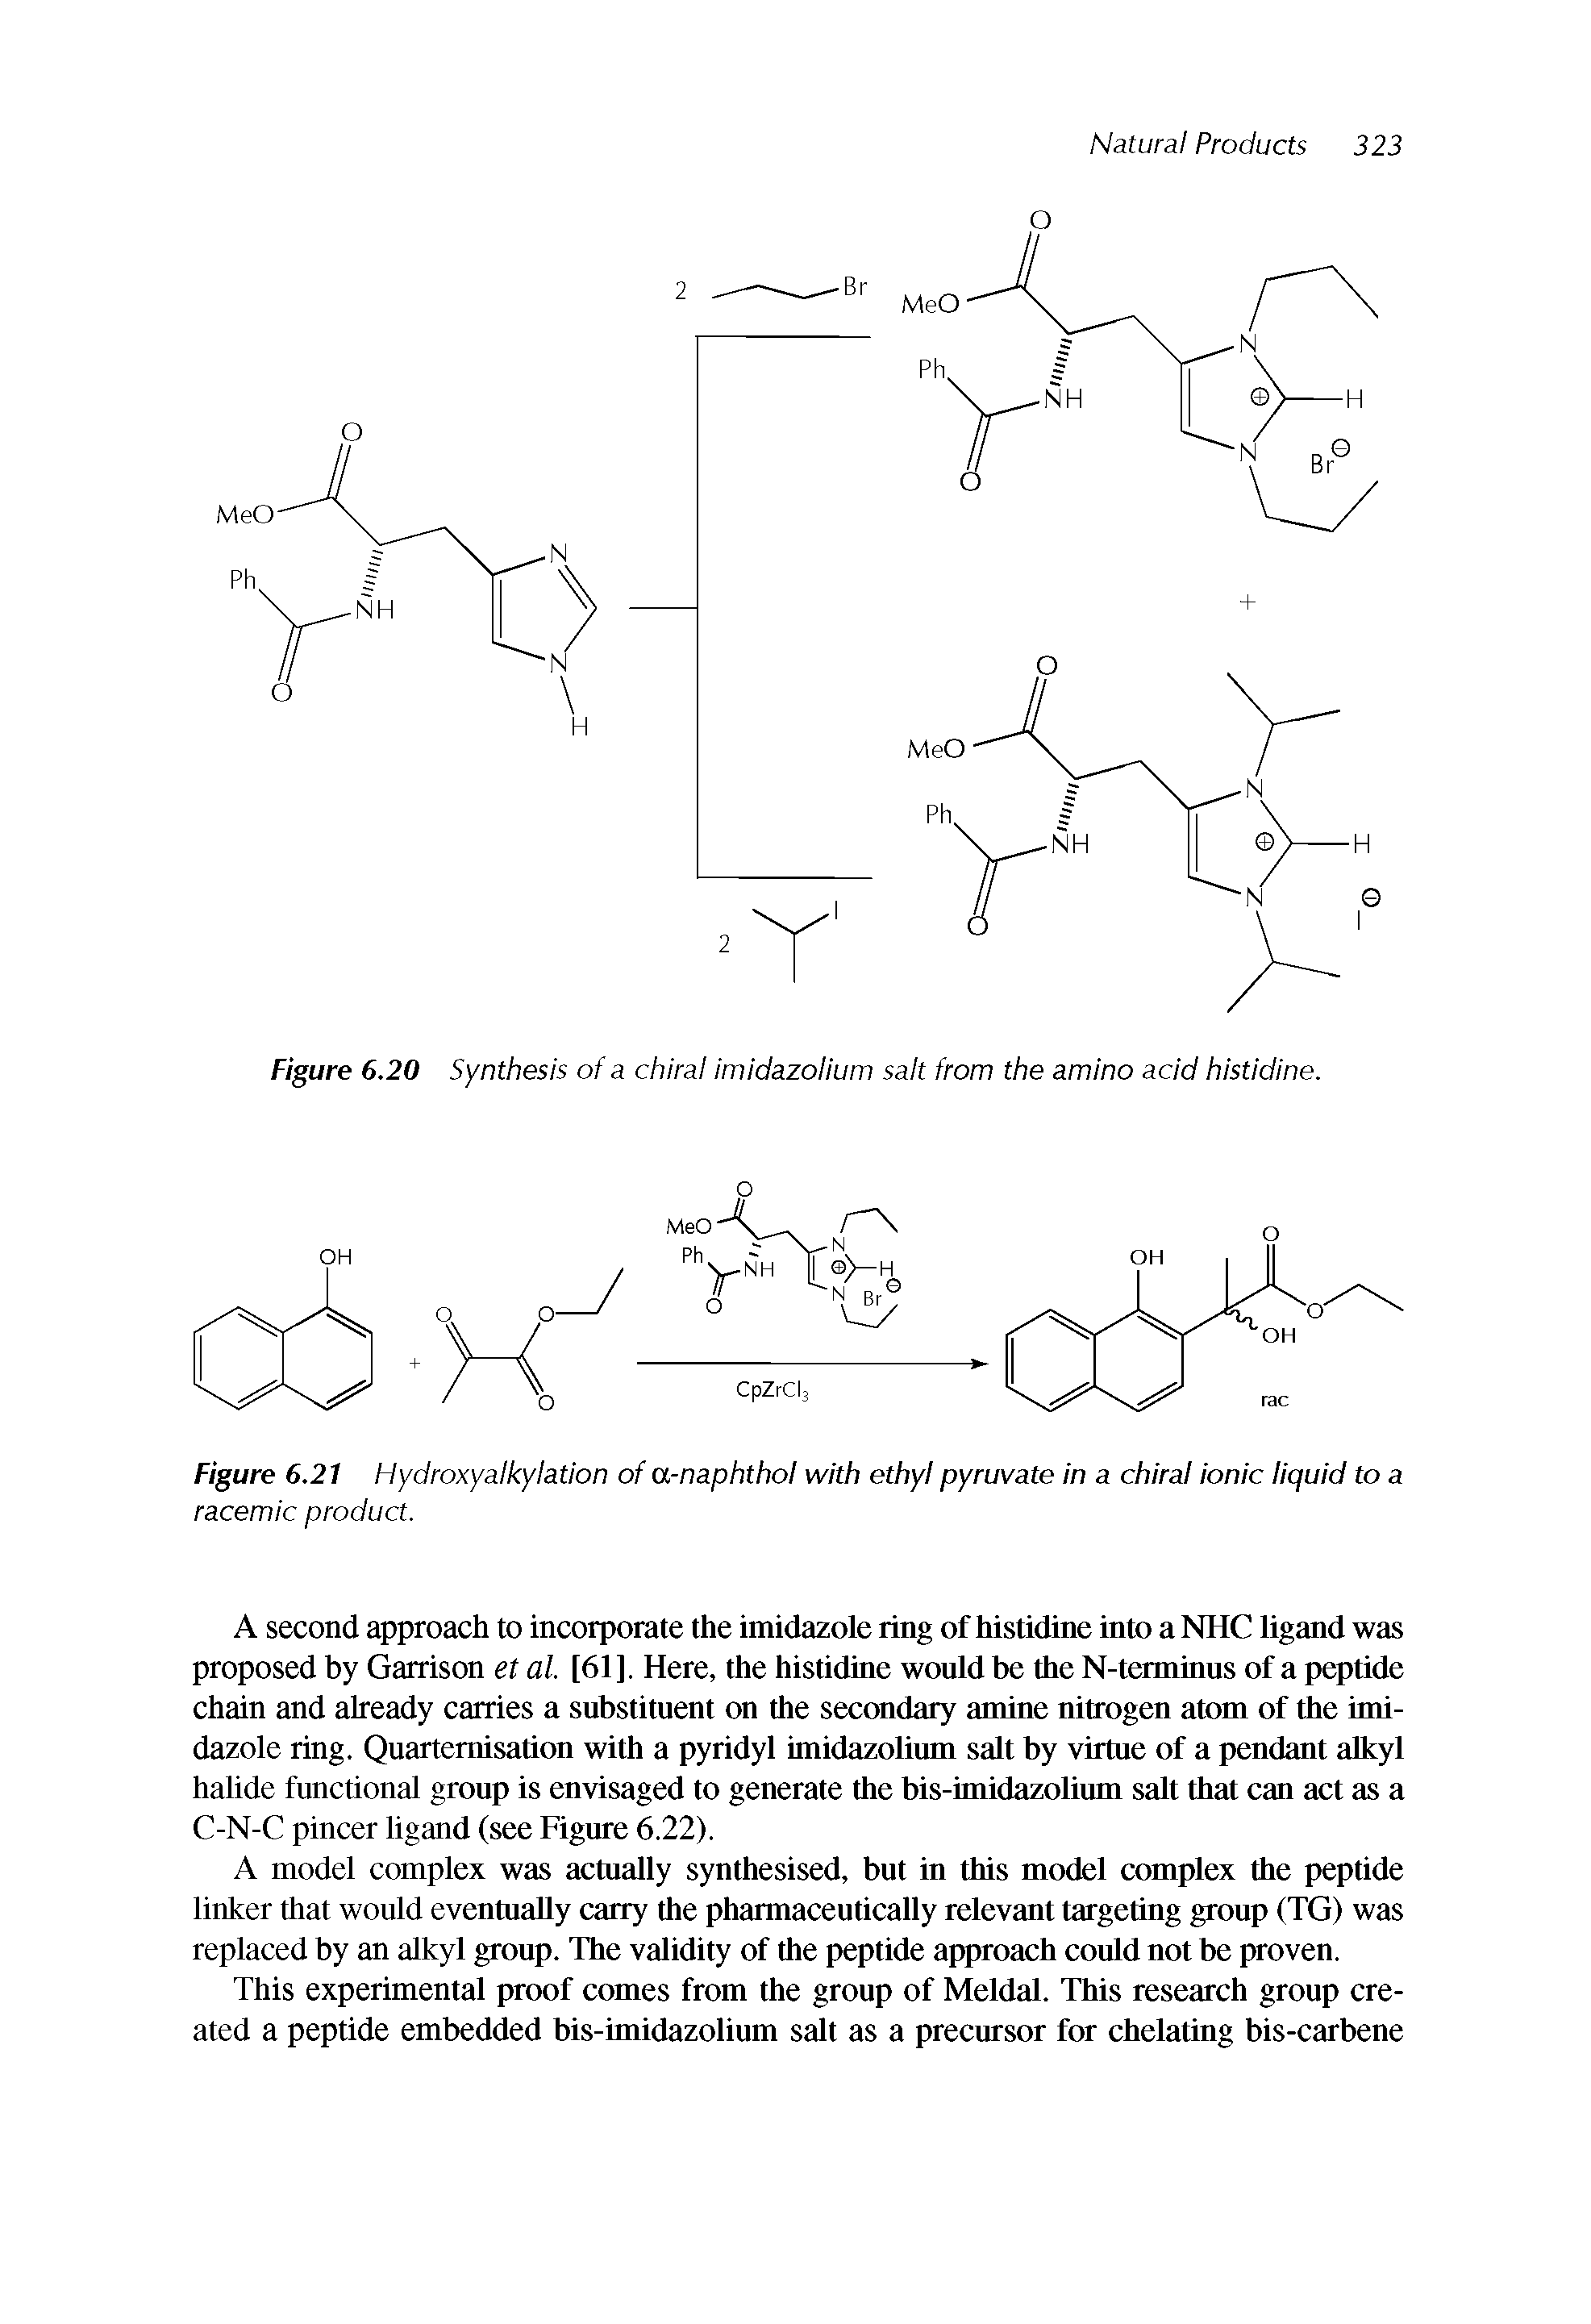 Figure 6.20 Synthesis of a chiral imidazolium salt from the amino acid histidine.